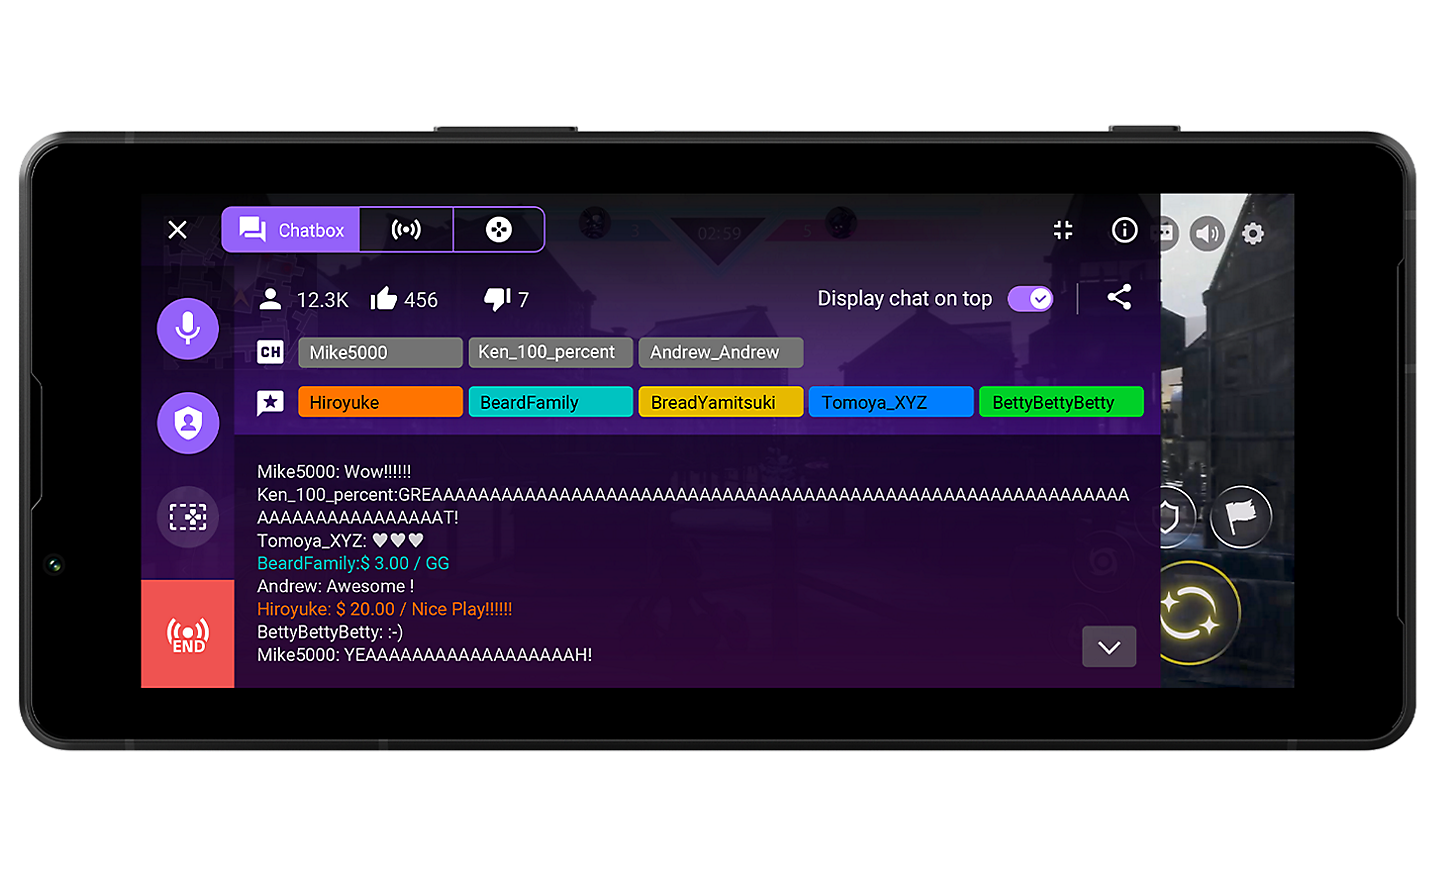 Image of an Xperia 5 V with a Chatbox interface on screen